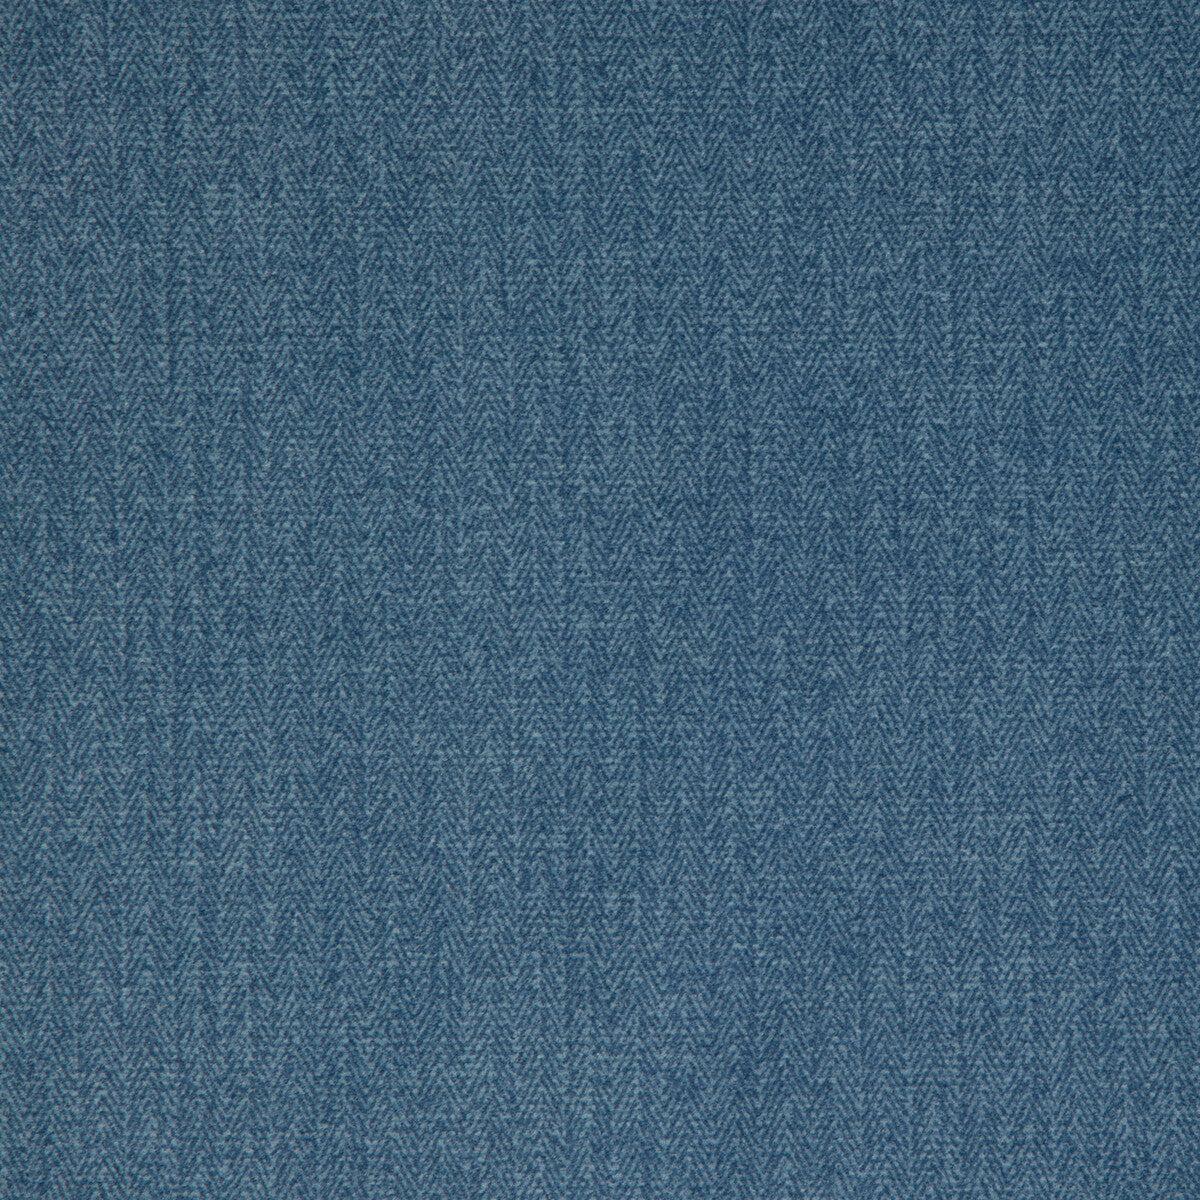 Kravet Design fabric in twill-275672 color - pattern TWILL.2756-72.0 - by Kravet Design in the Performance collection